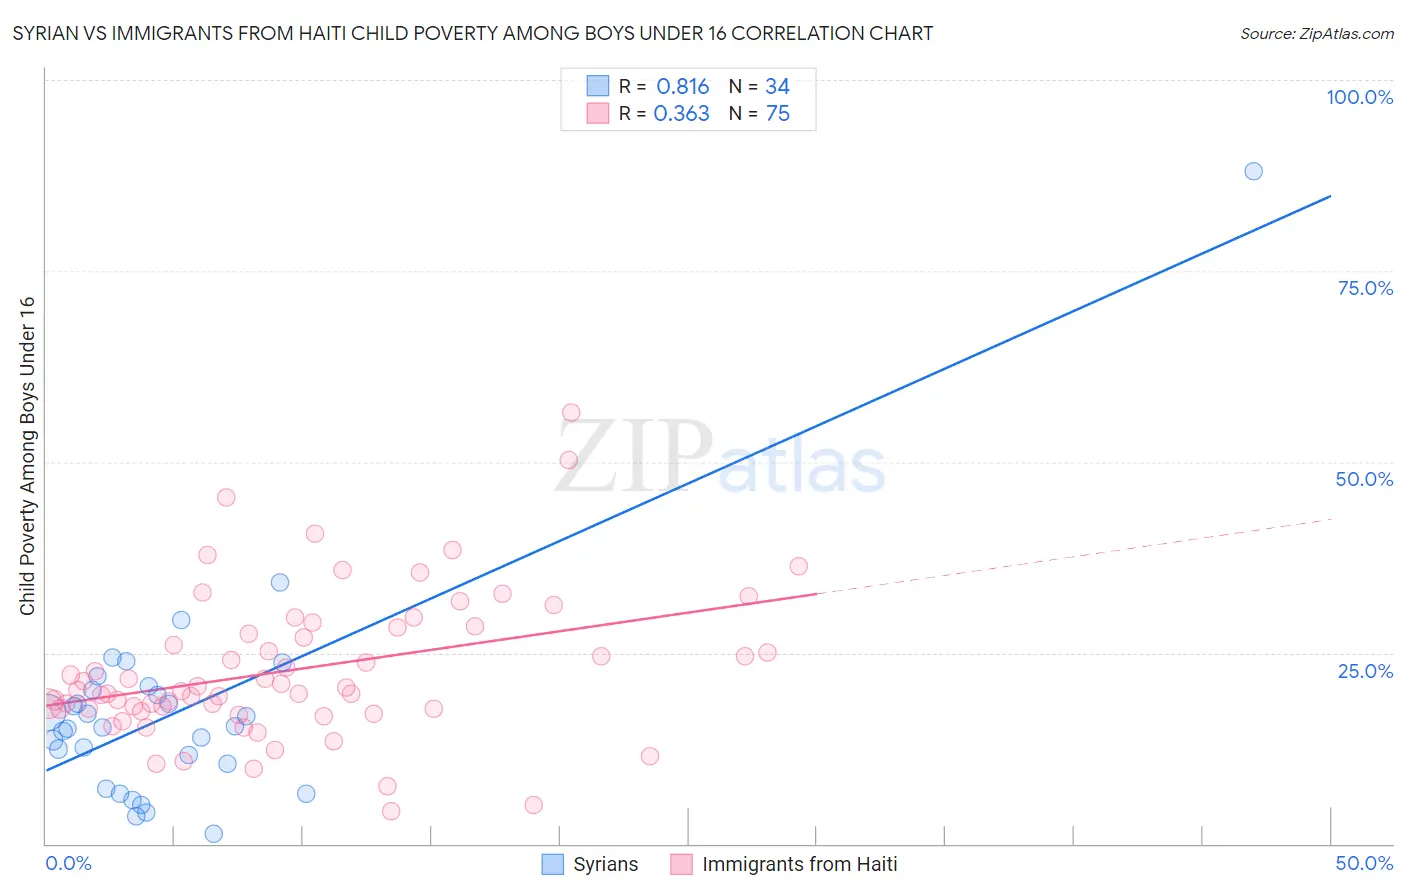 Syrian vs Immigrants from Haiti Child Poverty Among Boys Under 16